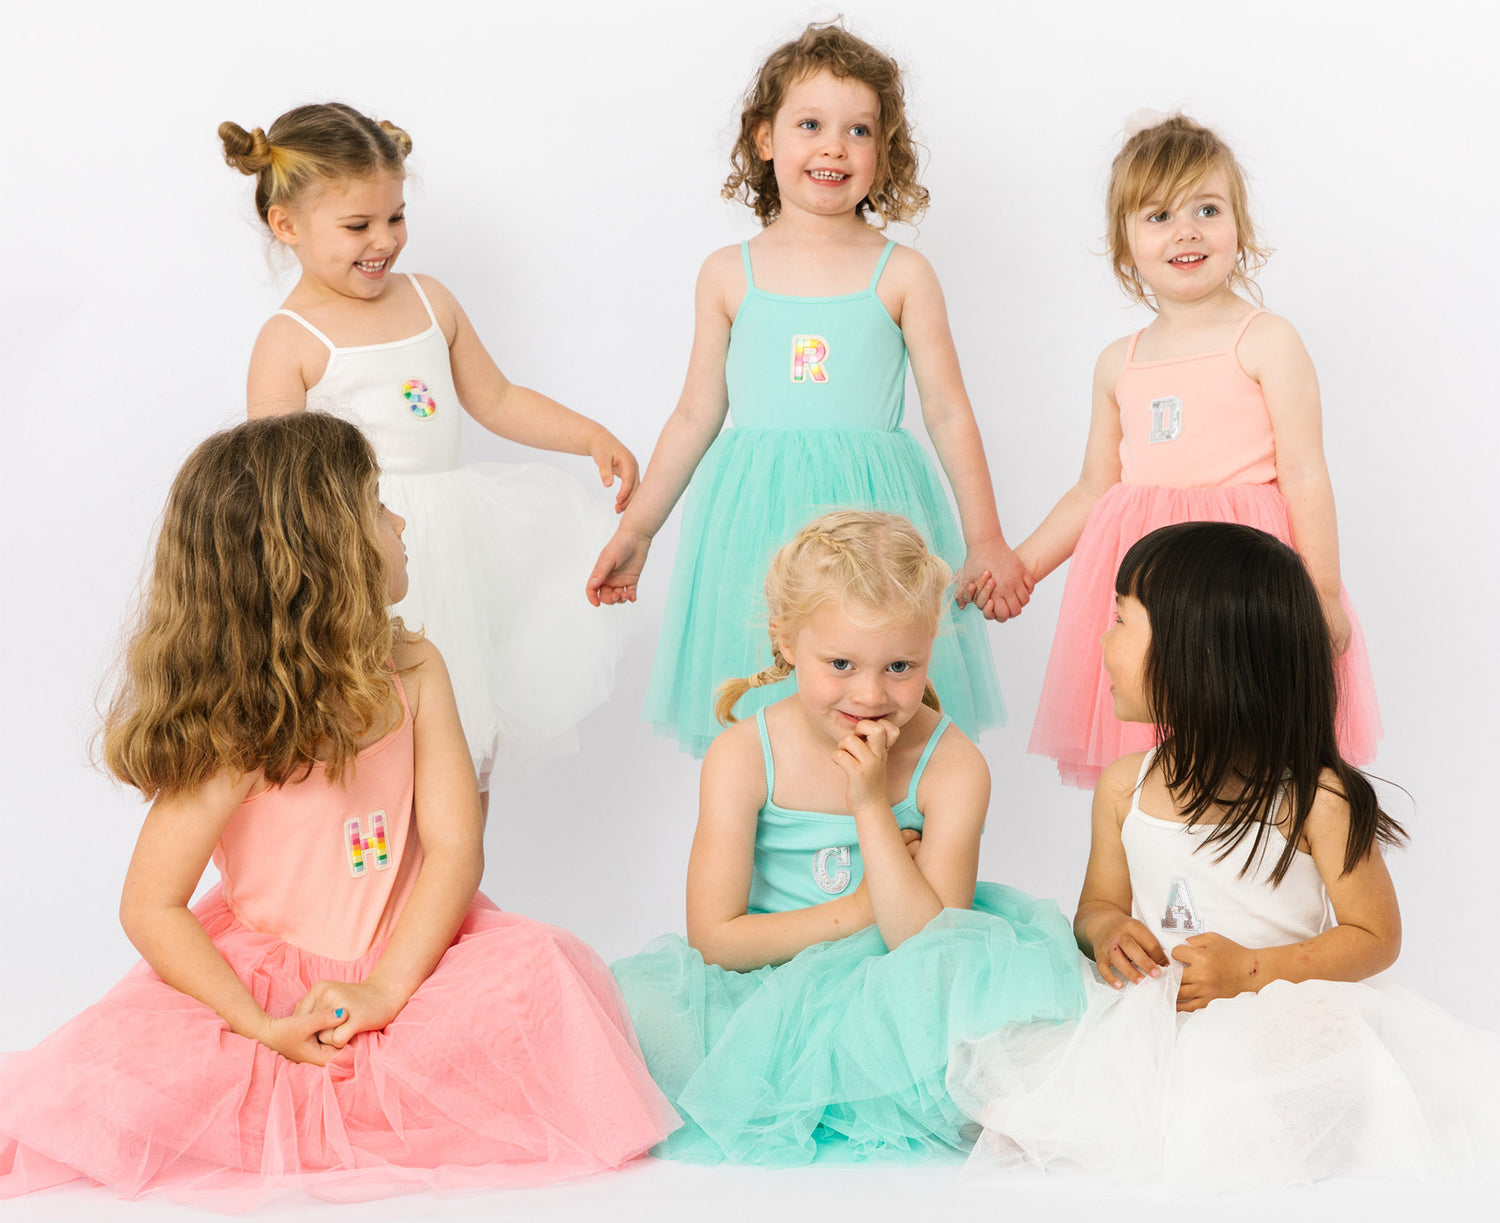 Girls wearing tutu dresses personalised with the first letter of the child’s name stitched onto the front of them